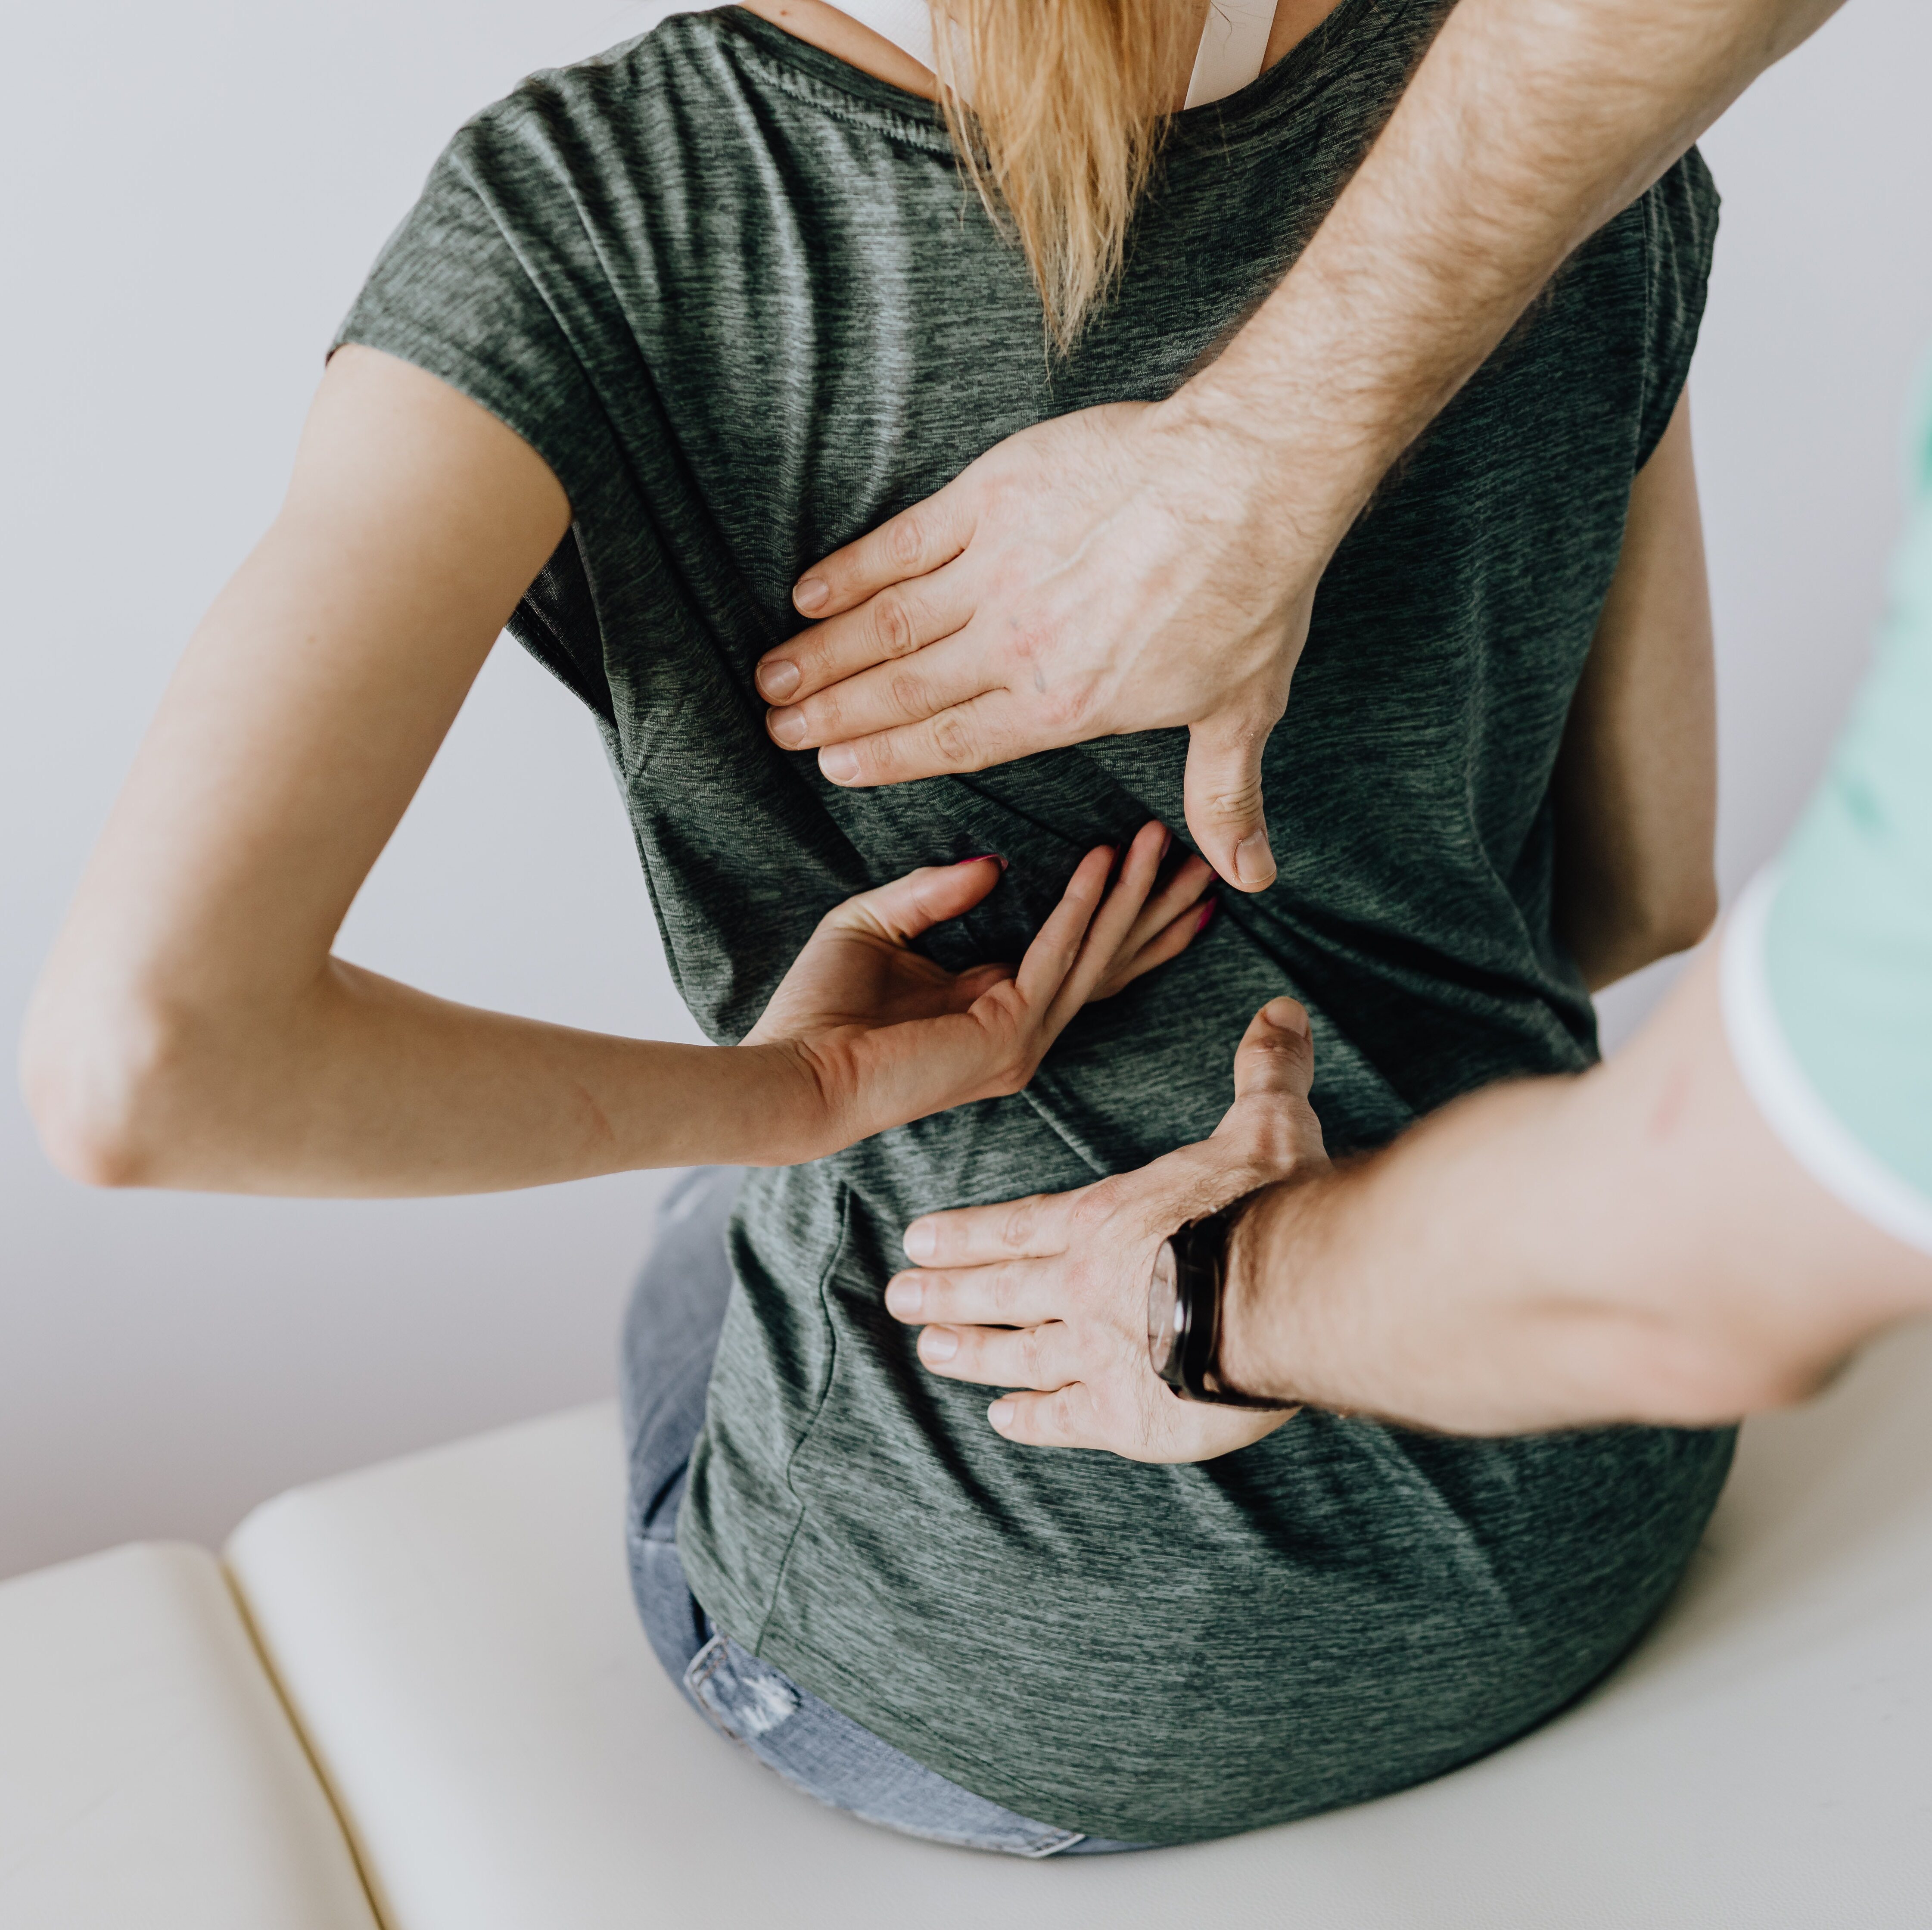 5 Tips for a Move When You Have Back Pain or a Spine Injury